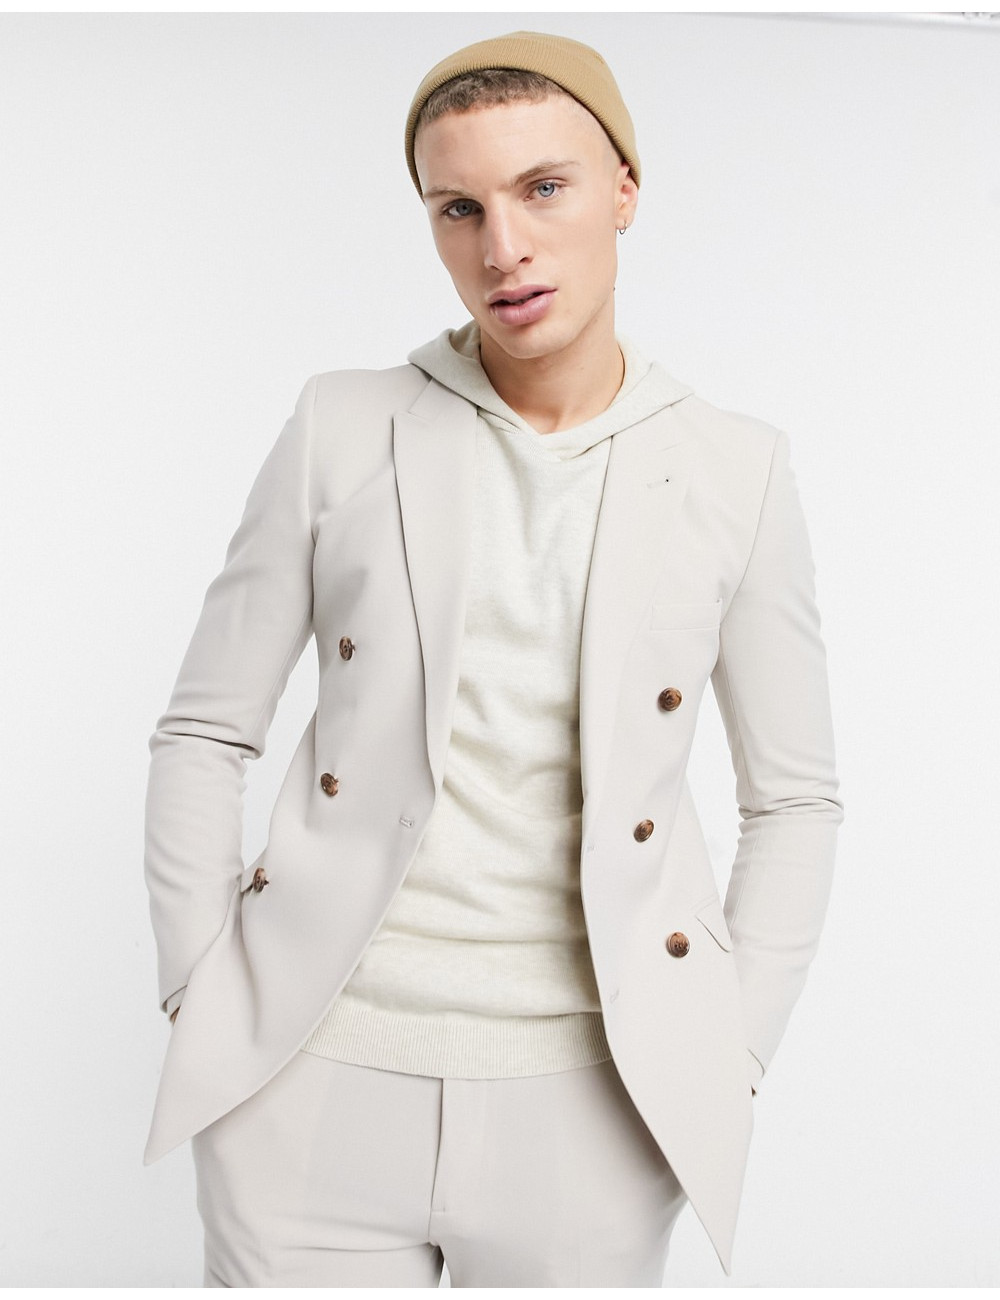 ASOS DESIGN super skinny double breasted suit jacket in stone